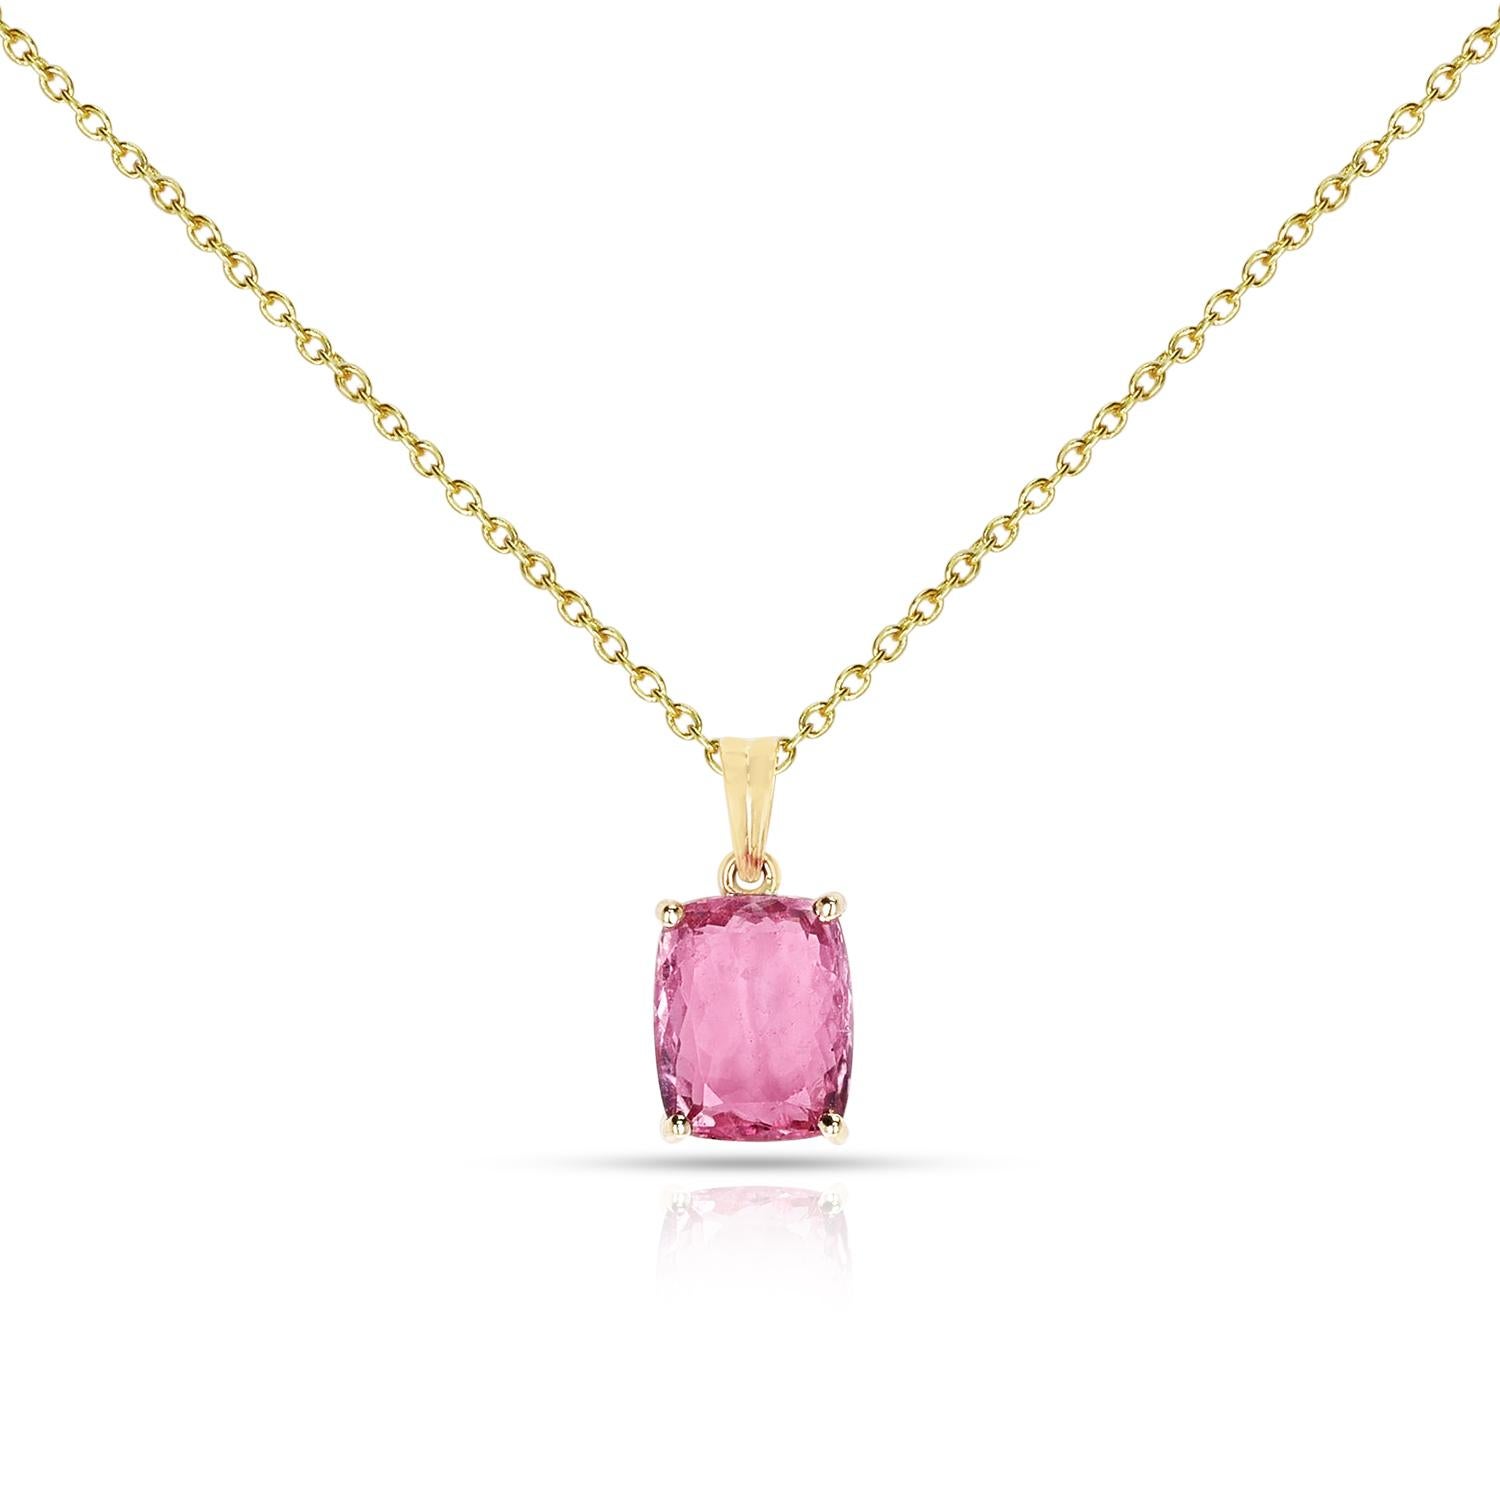 Women's or Men's Pink Tourmaline Pendant '5 Ct', 18K Yellow Gold For Sale